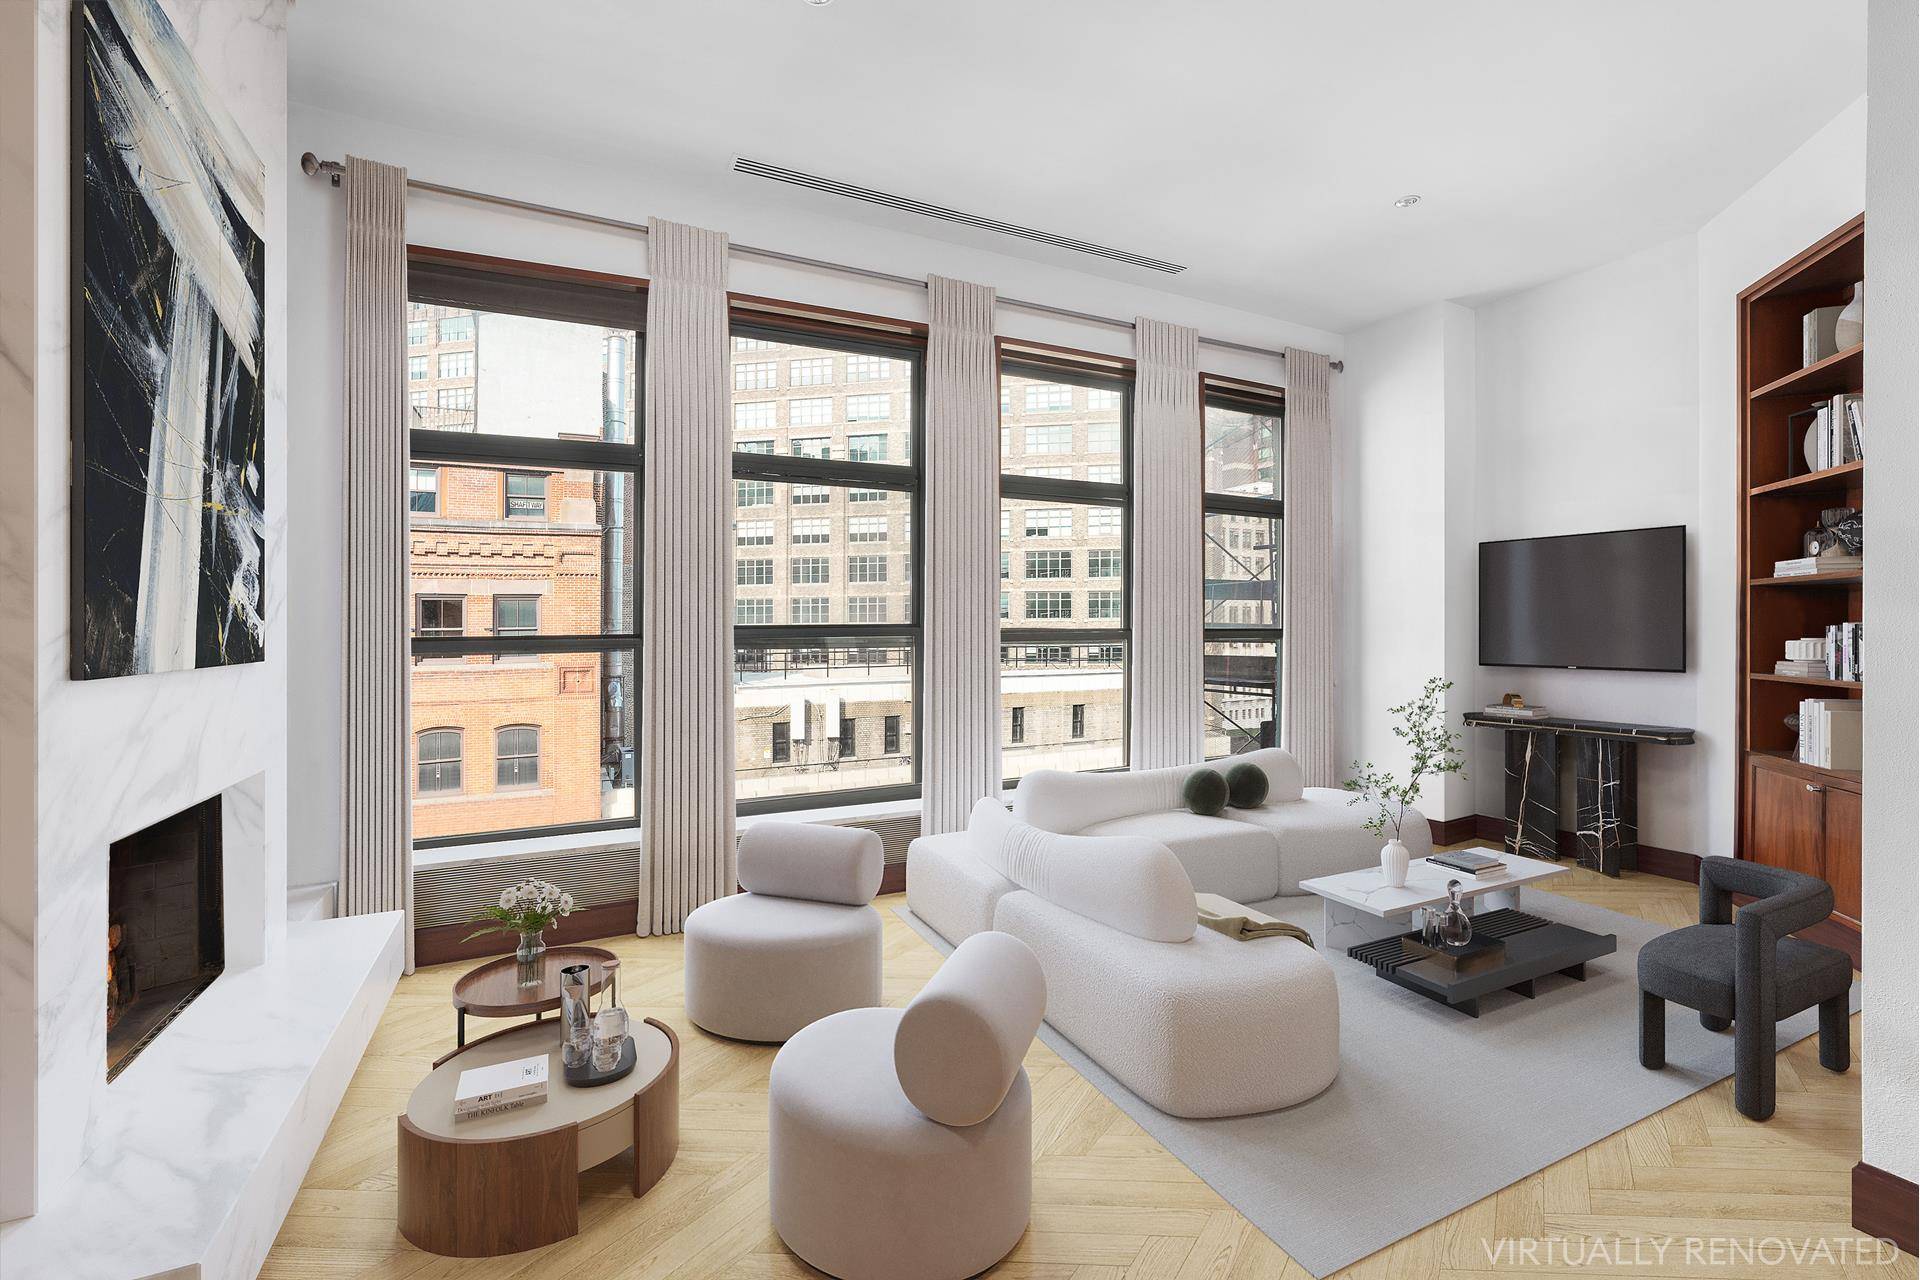 Welcome to 11 Vestry, where opulence meets sophistication in this exceptional three story Tribeca penthouse.